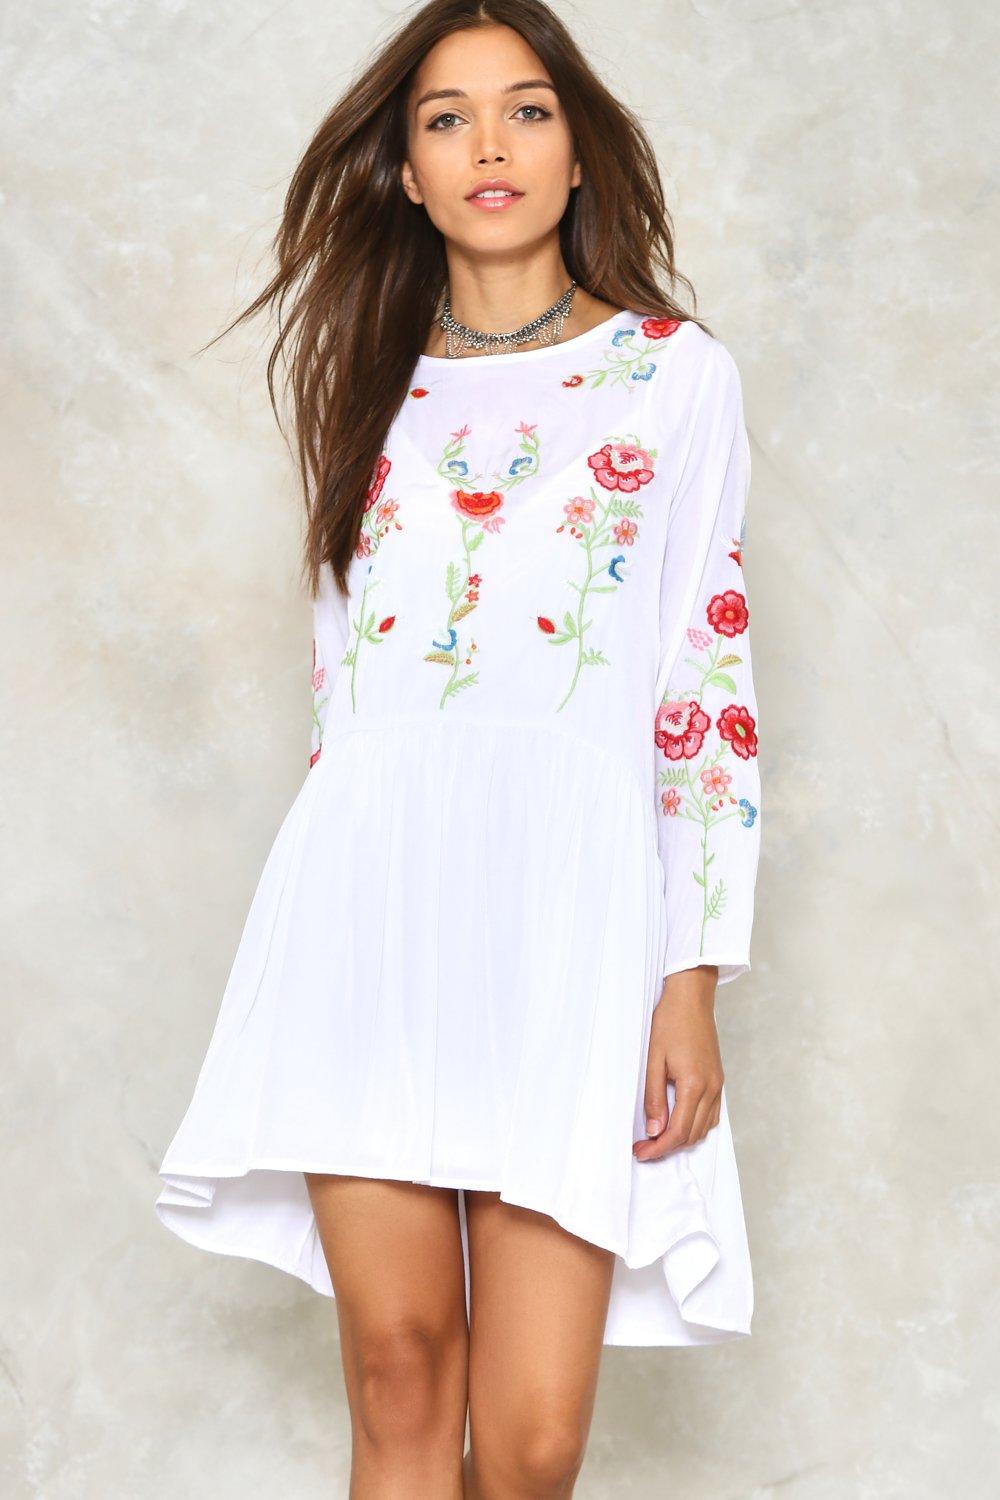 white dress with embroidered flowers